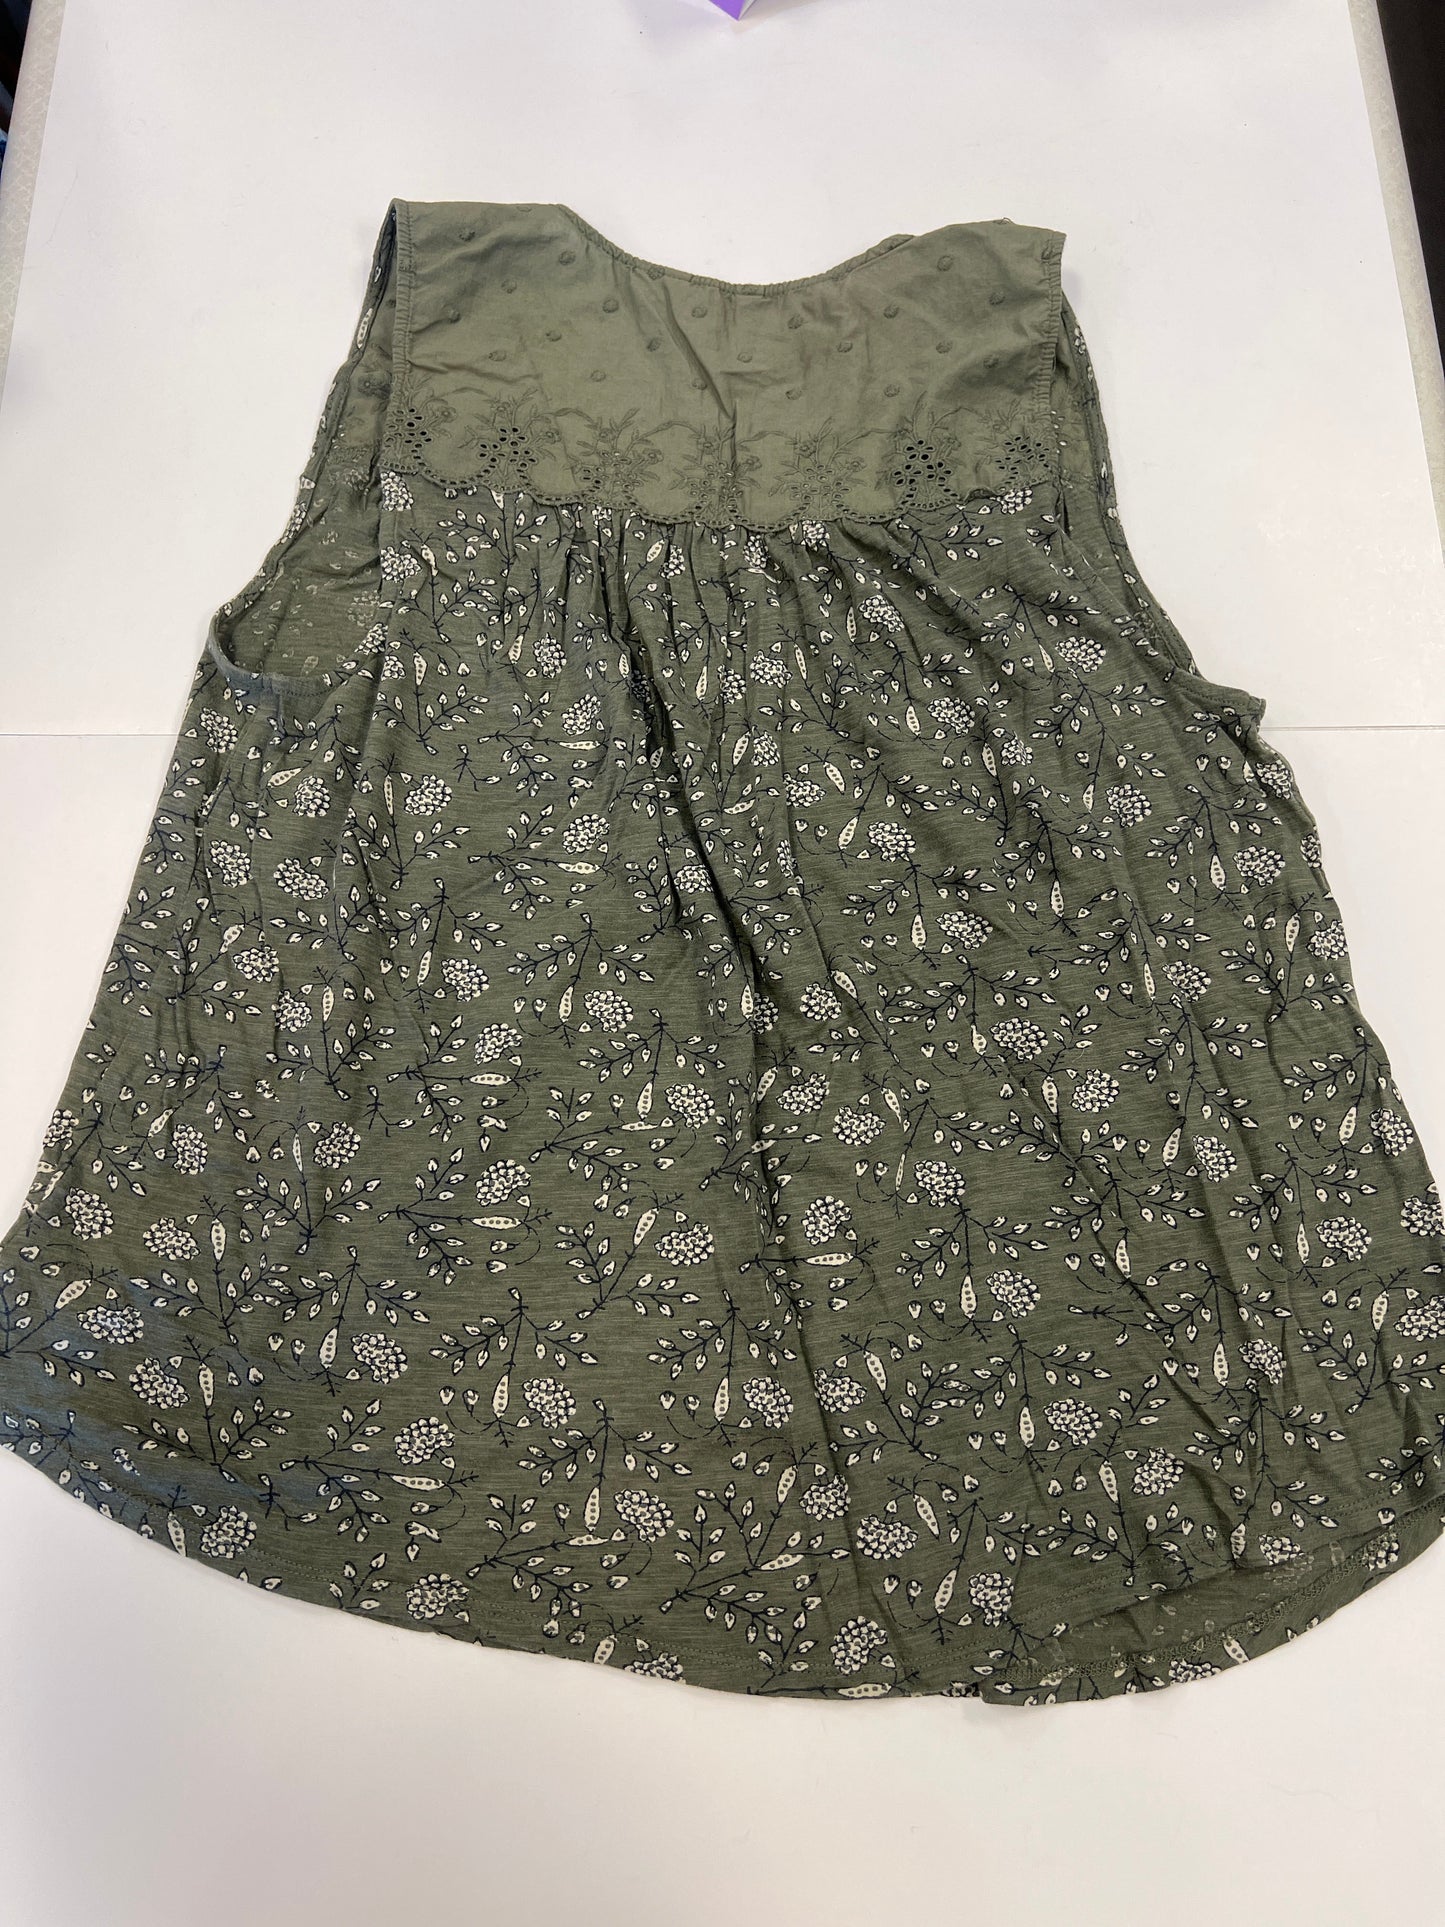 Top Sleeveless By Lucky Brand  Size: 1x